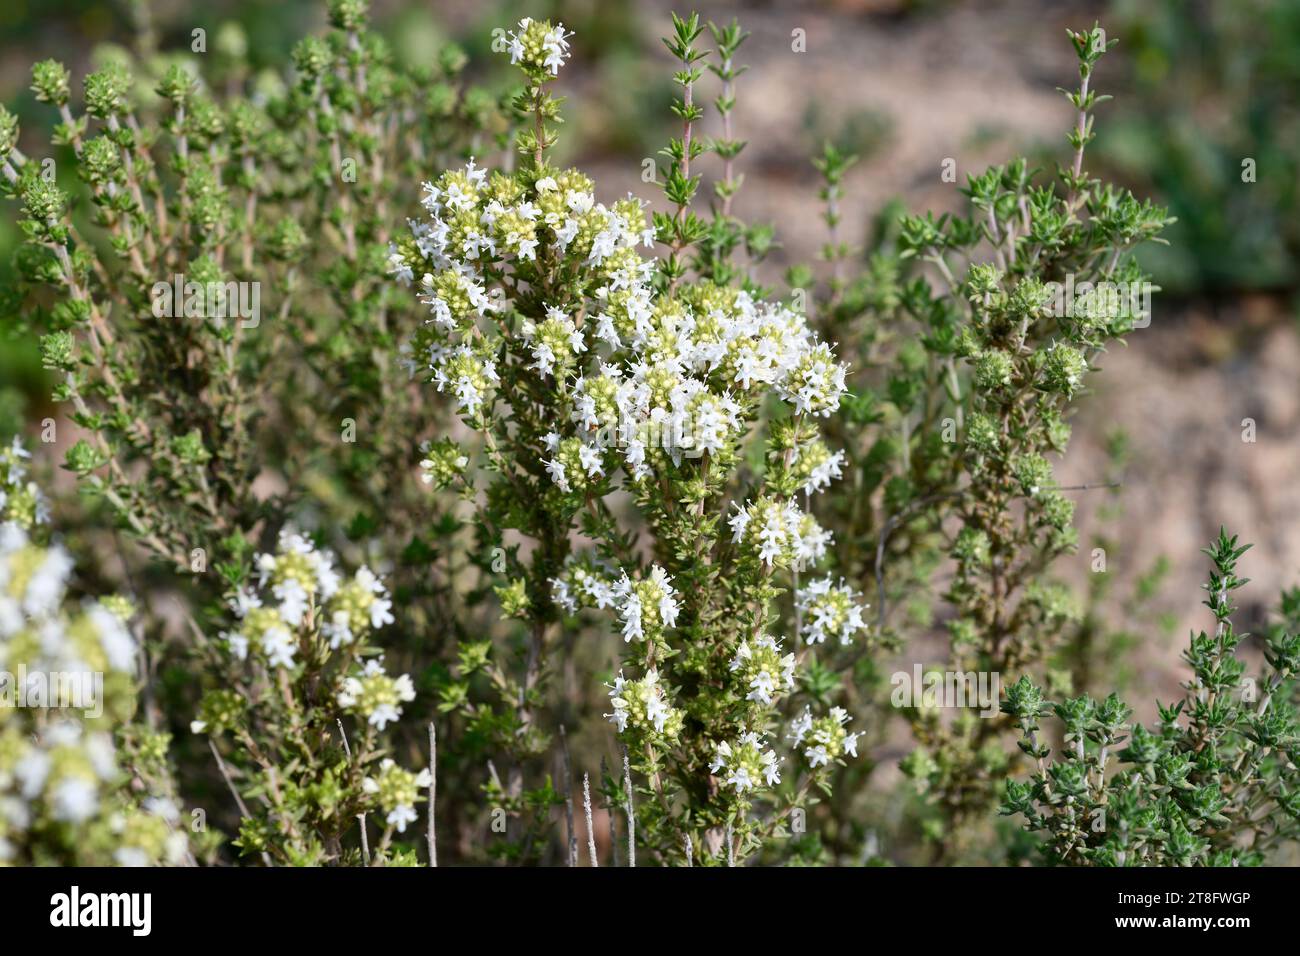 Tomillo limonero (Thymus baeticus) is a subshrub endemic to southeastern Spain from Cadiz to Almeria and southern Murcia. This photo was taken in Mala Stock Photo